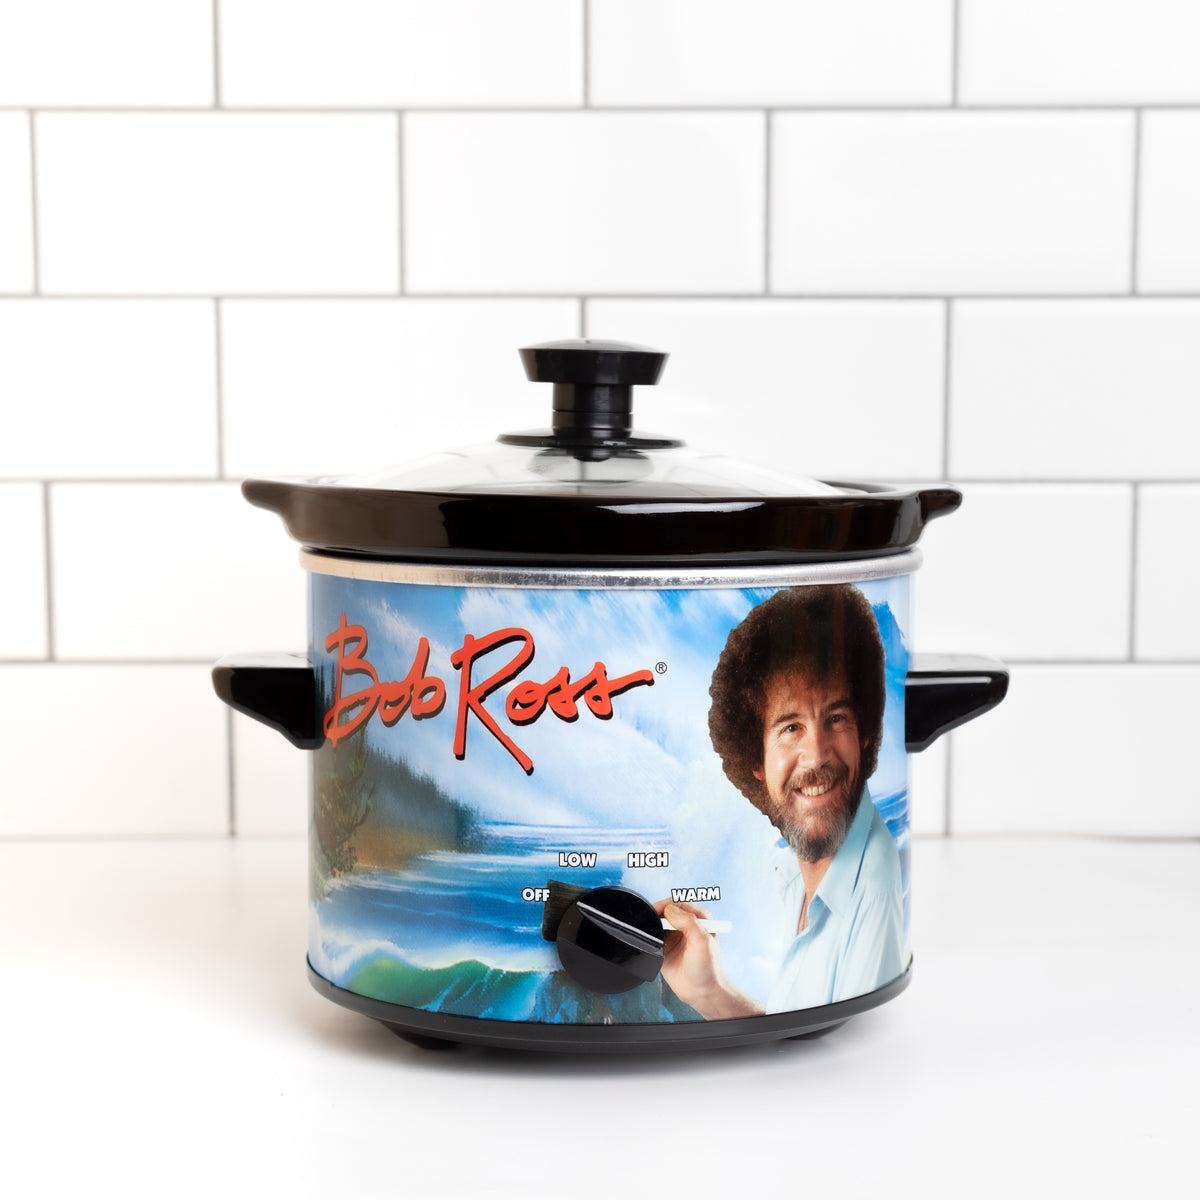 Bob Ross slow cooker on counter with white subway tiles